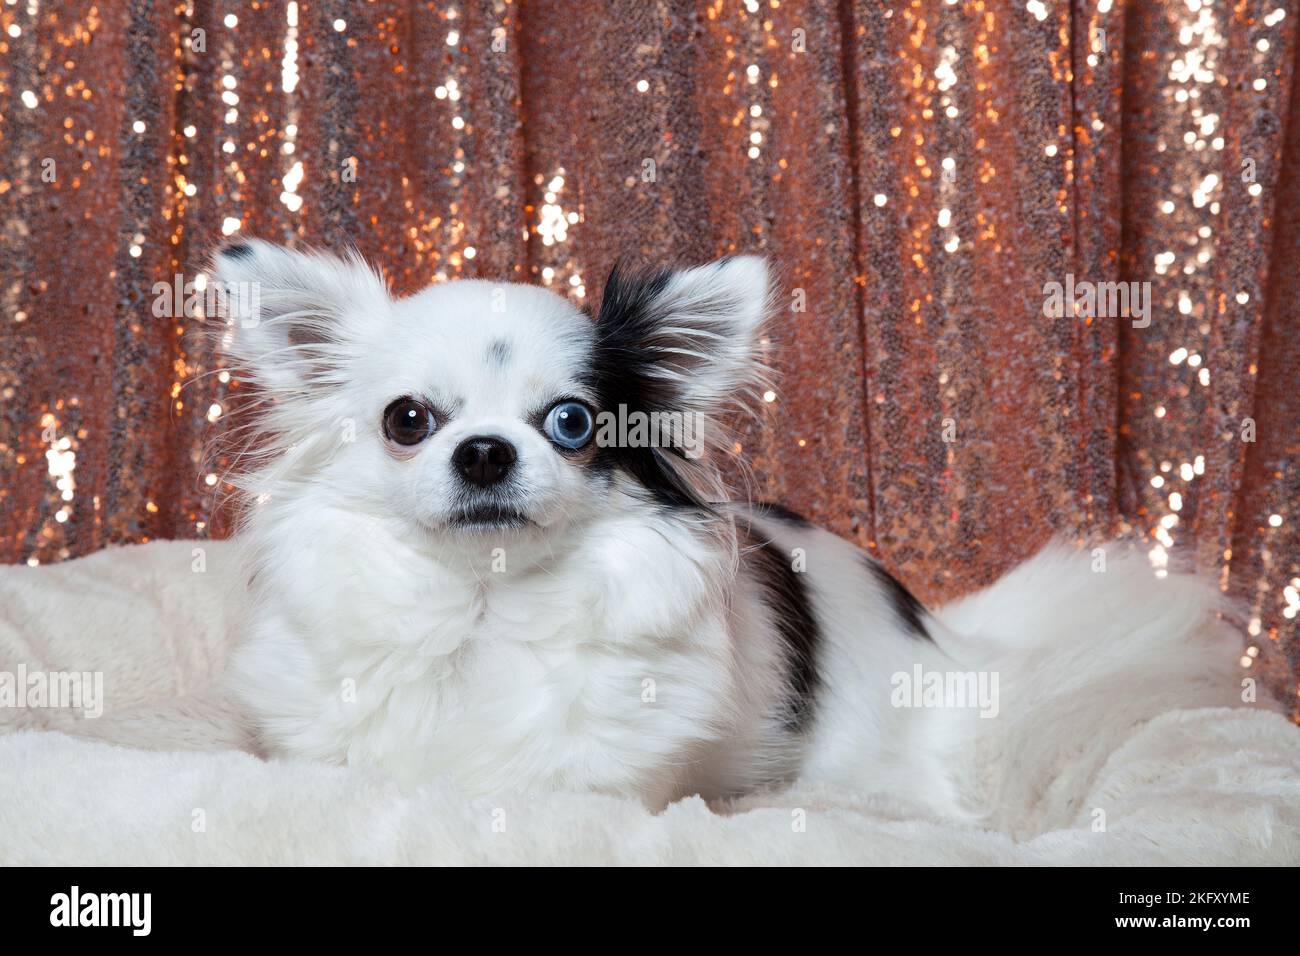 Black and white long hair chihuahua posing in a white furry bed against rose gold sequins drapes. Studio portrait of a small dog in front of a bright Stock Photo